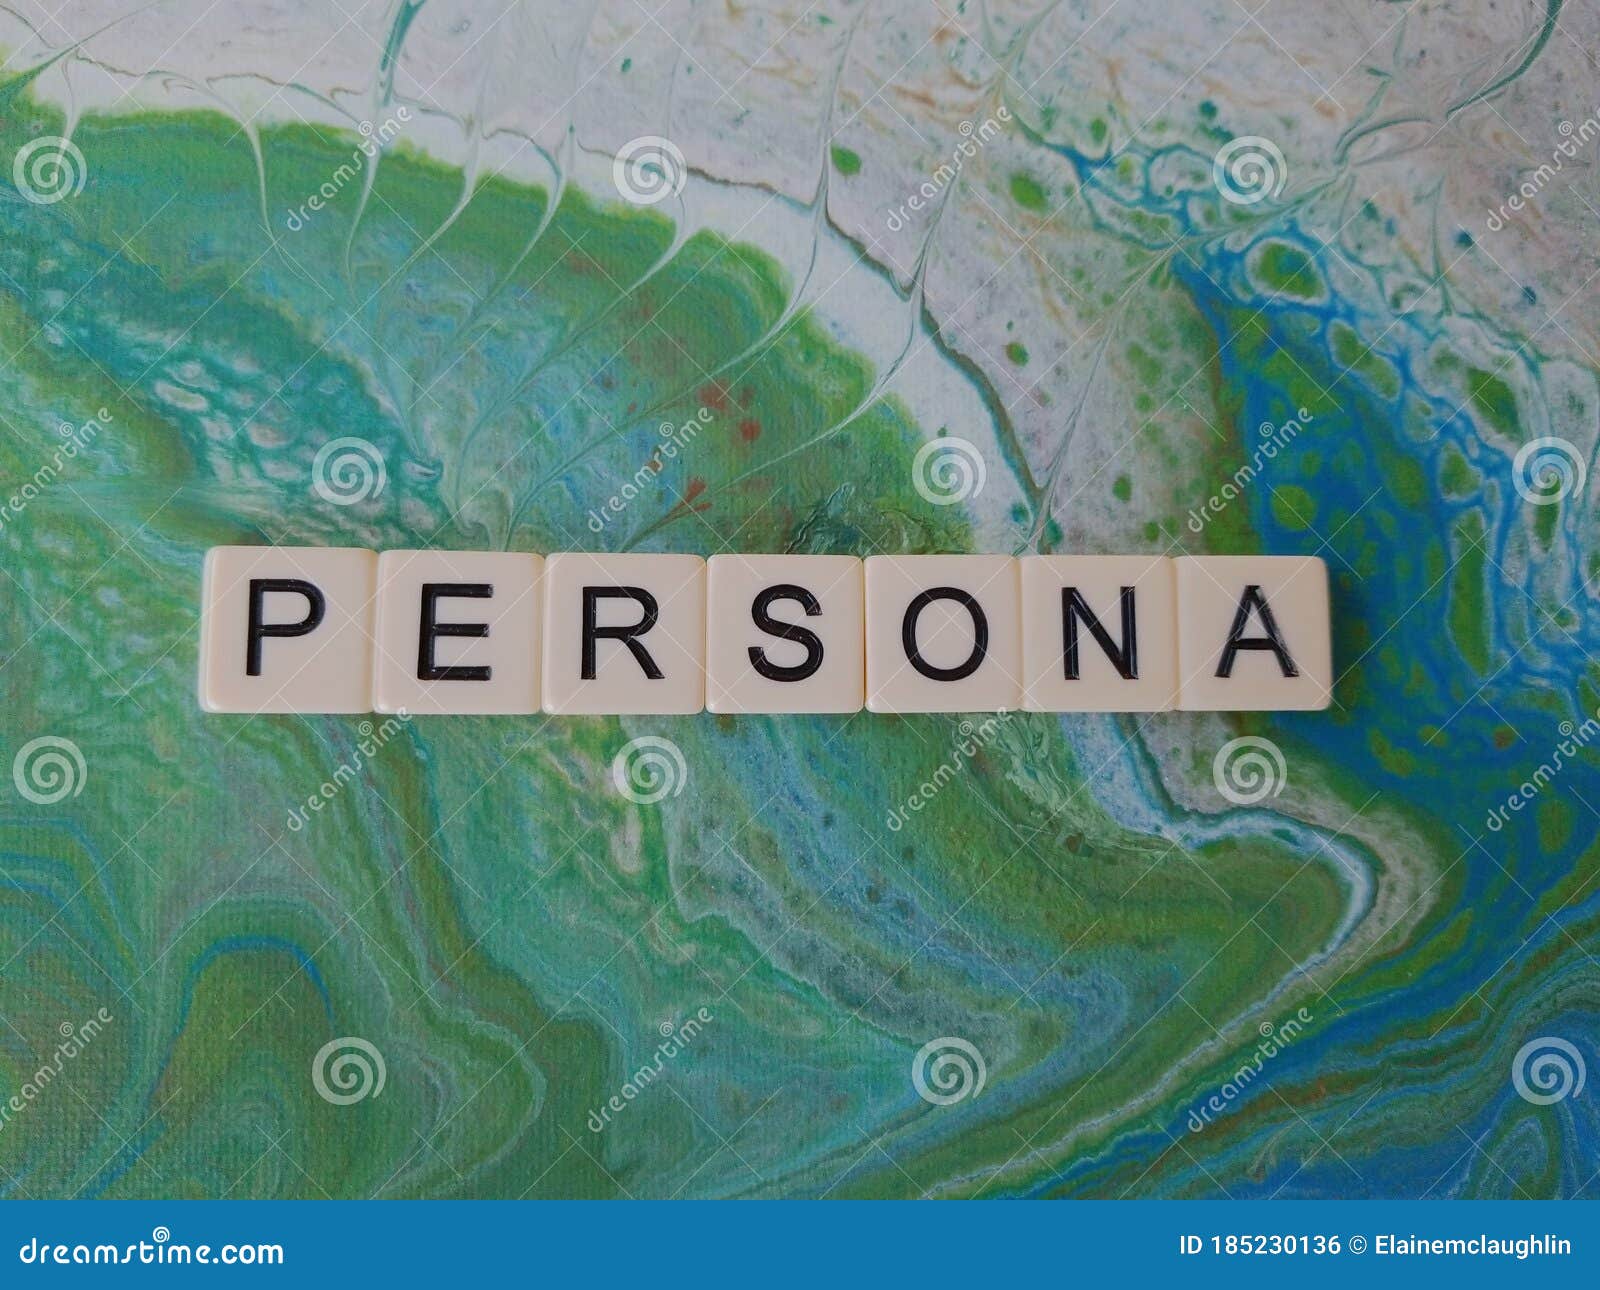 persona word on contemporary green and blue background